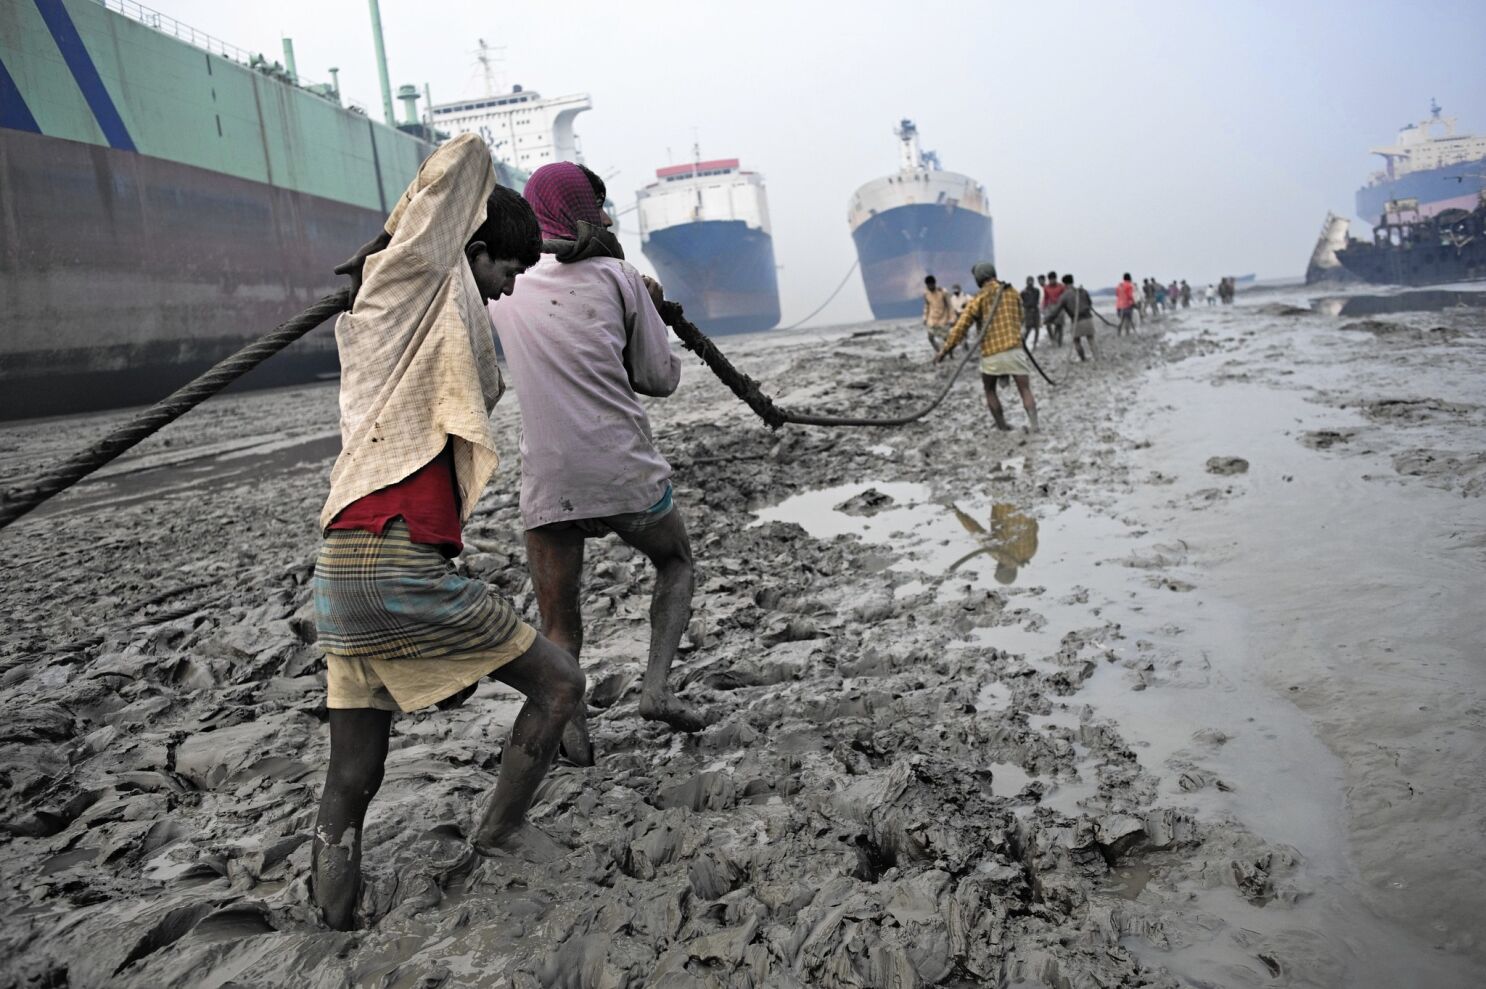 Government is keen to improve Bangladesh ship recycling industry